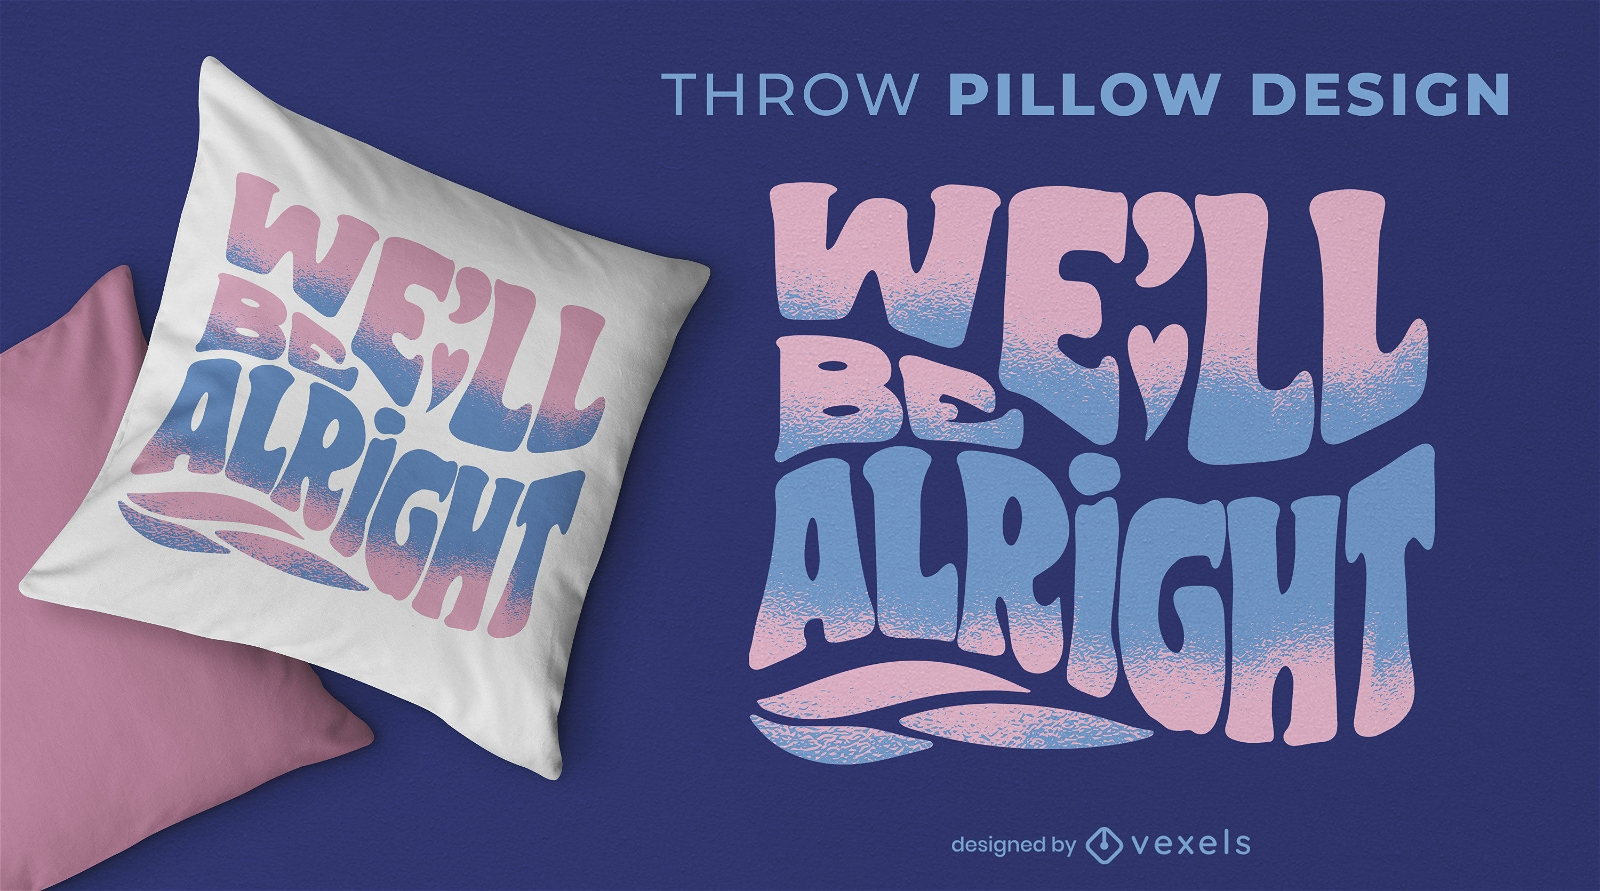 We'll be alright throw pillow design